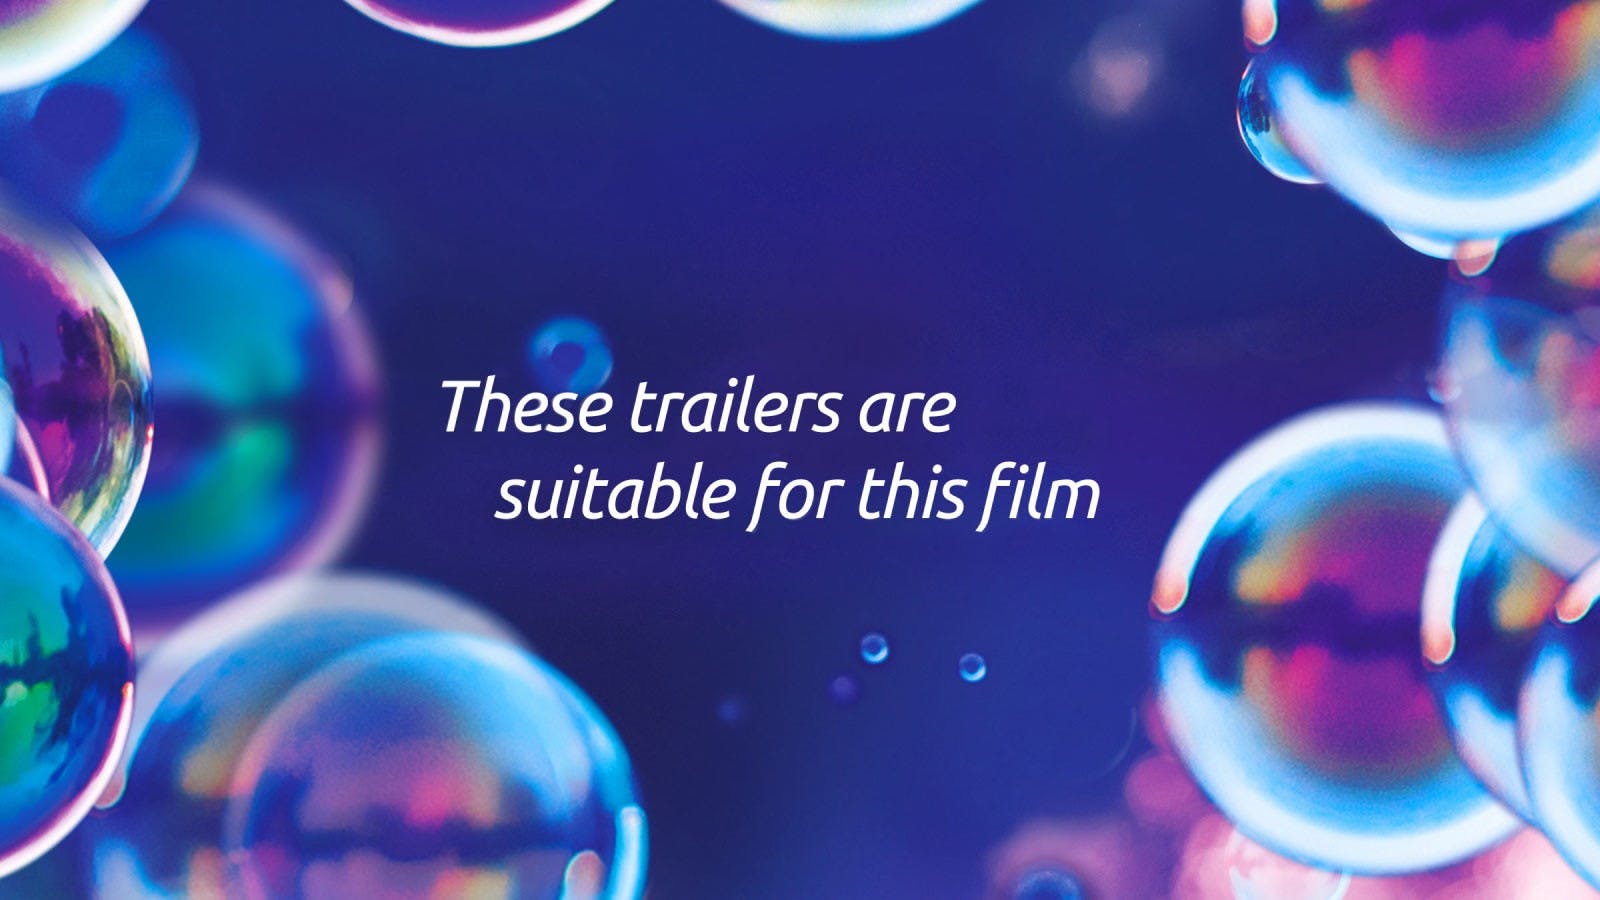 Odeon trailers frame